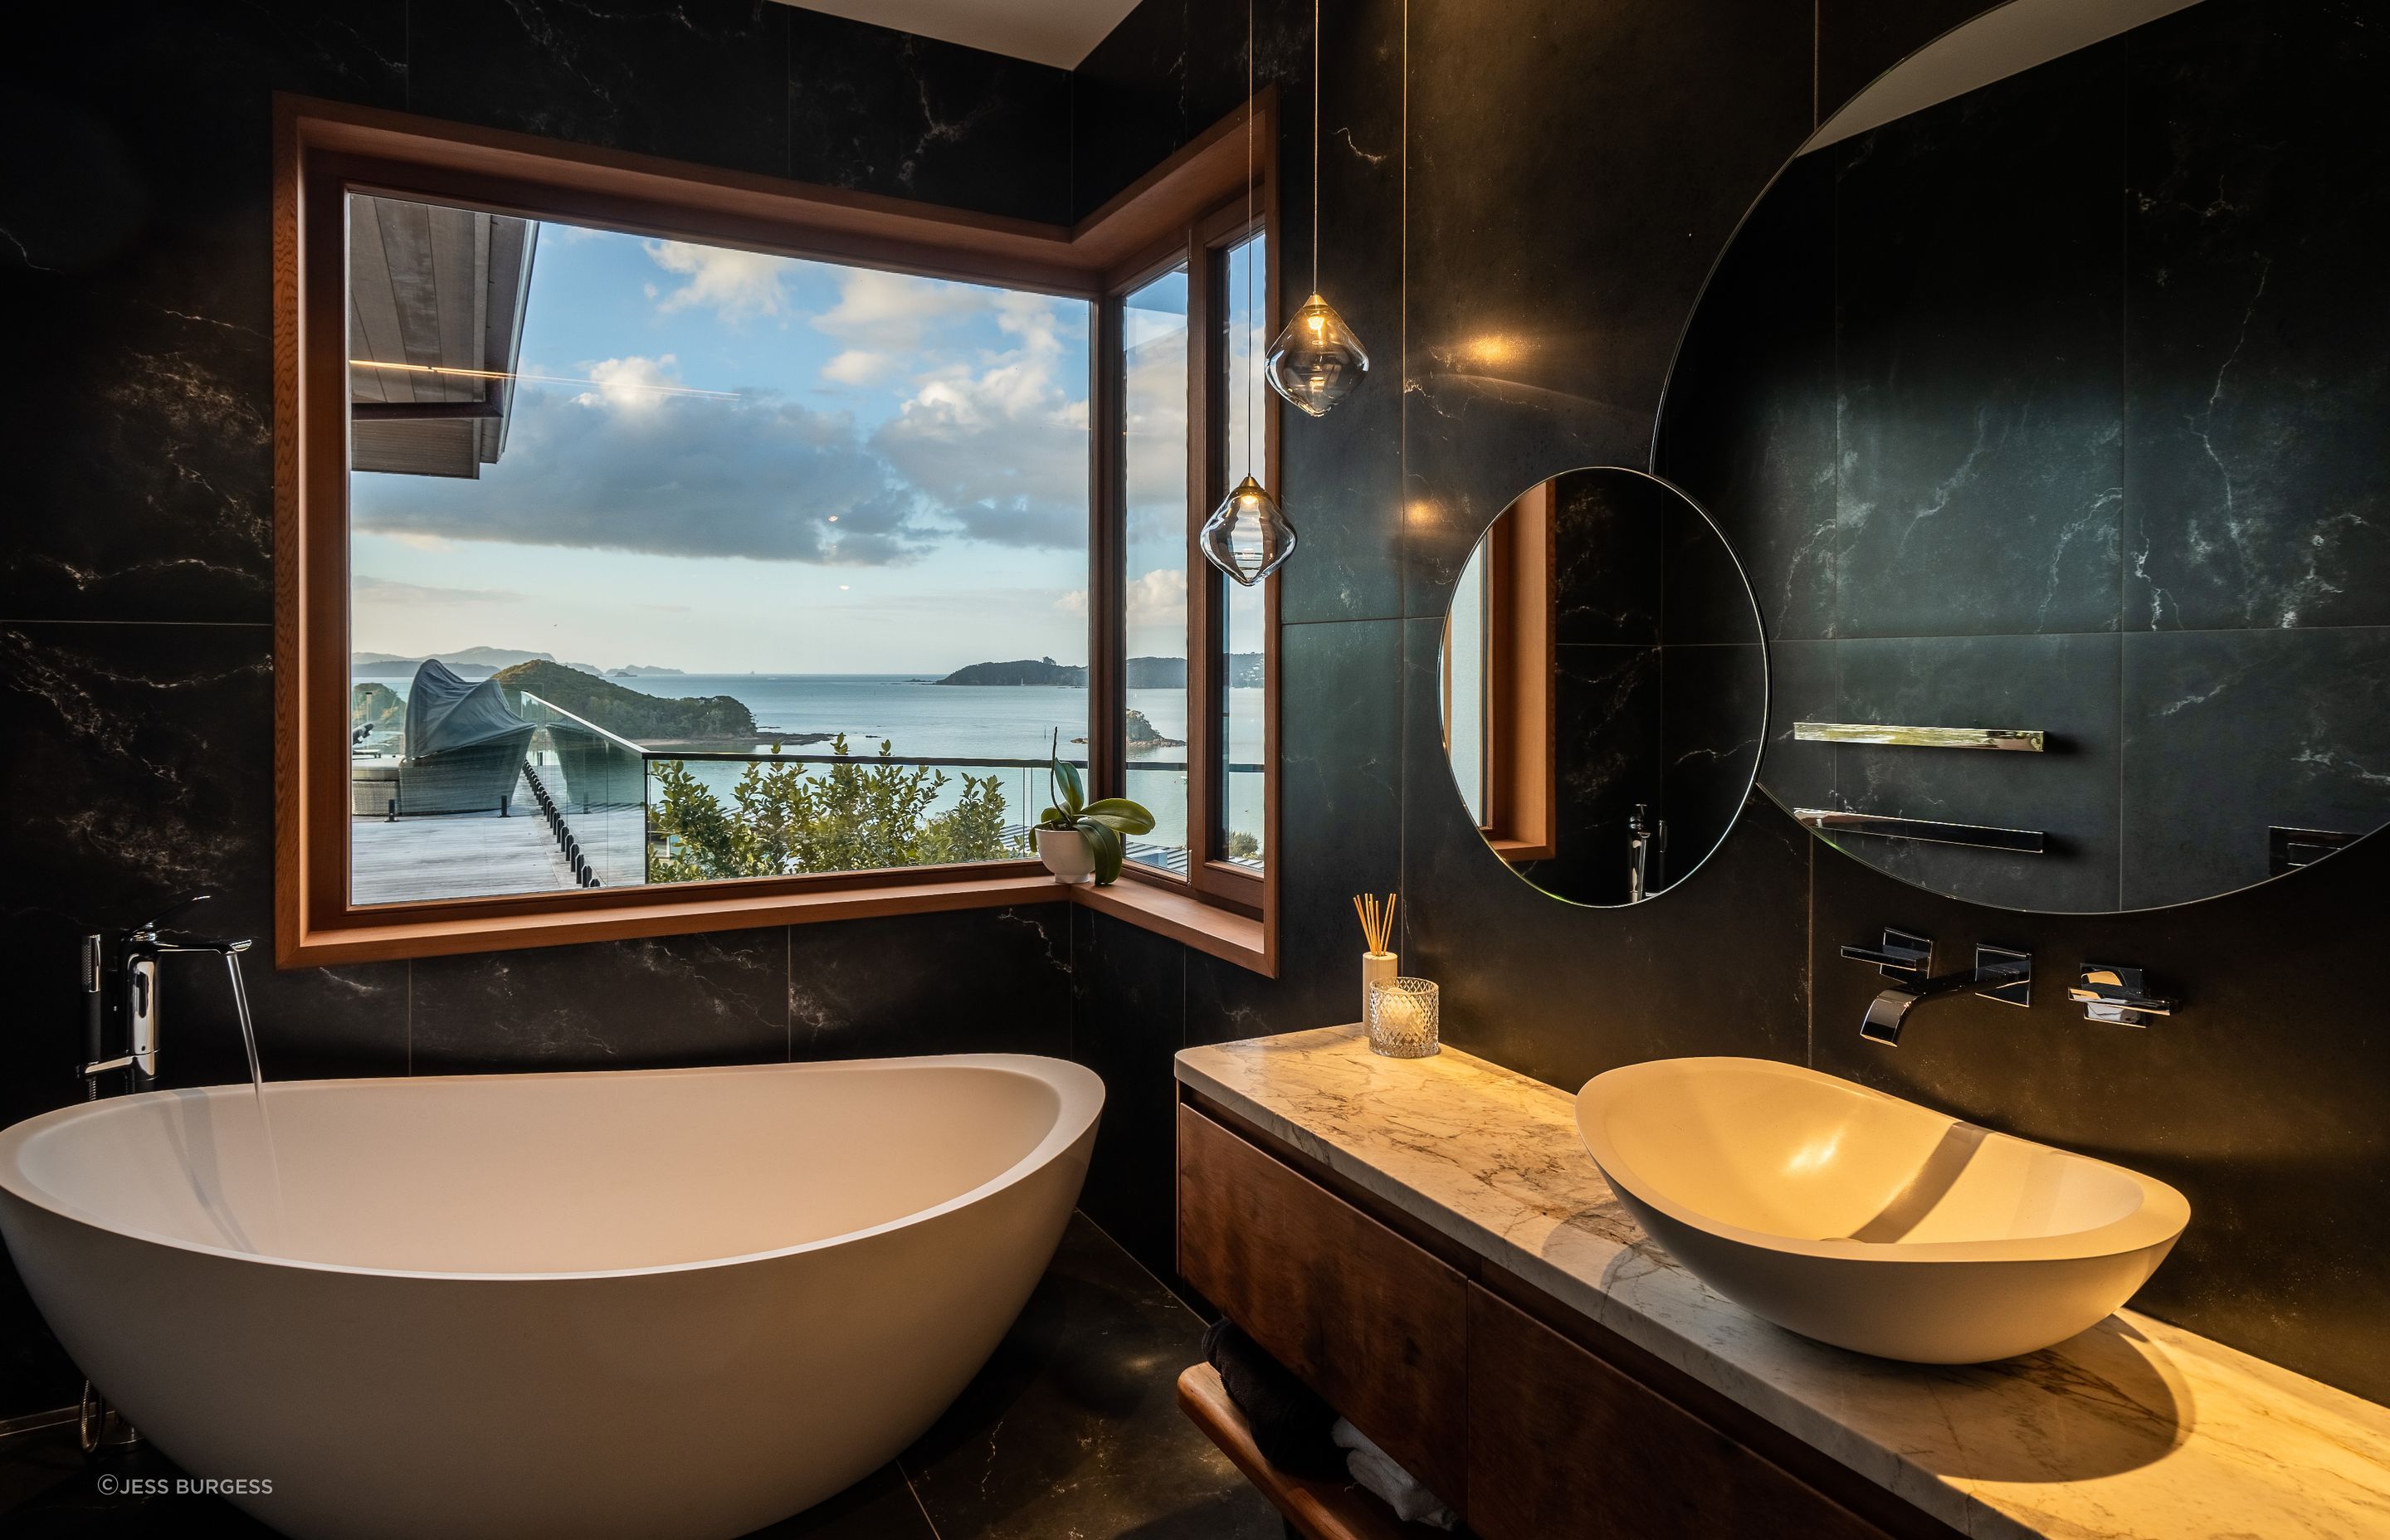 A bathroom with a view. The bath tapware is by Kohler.